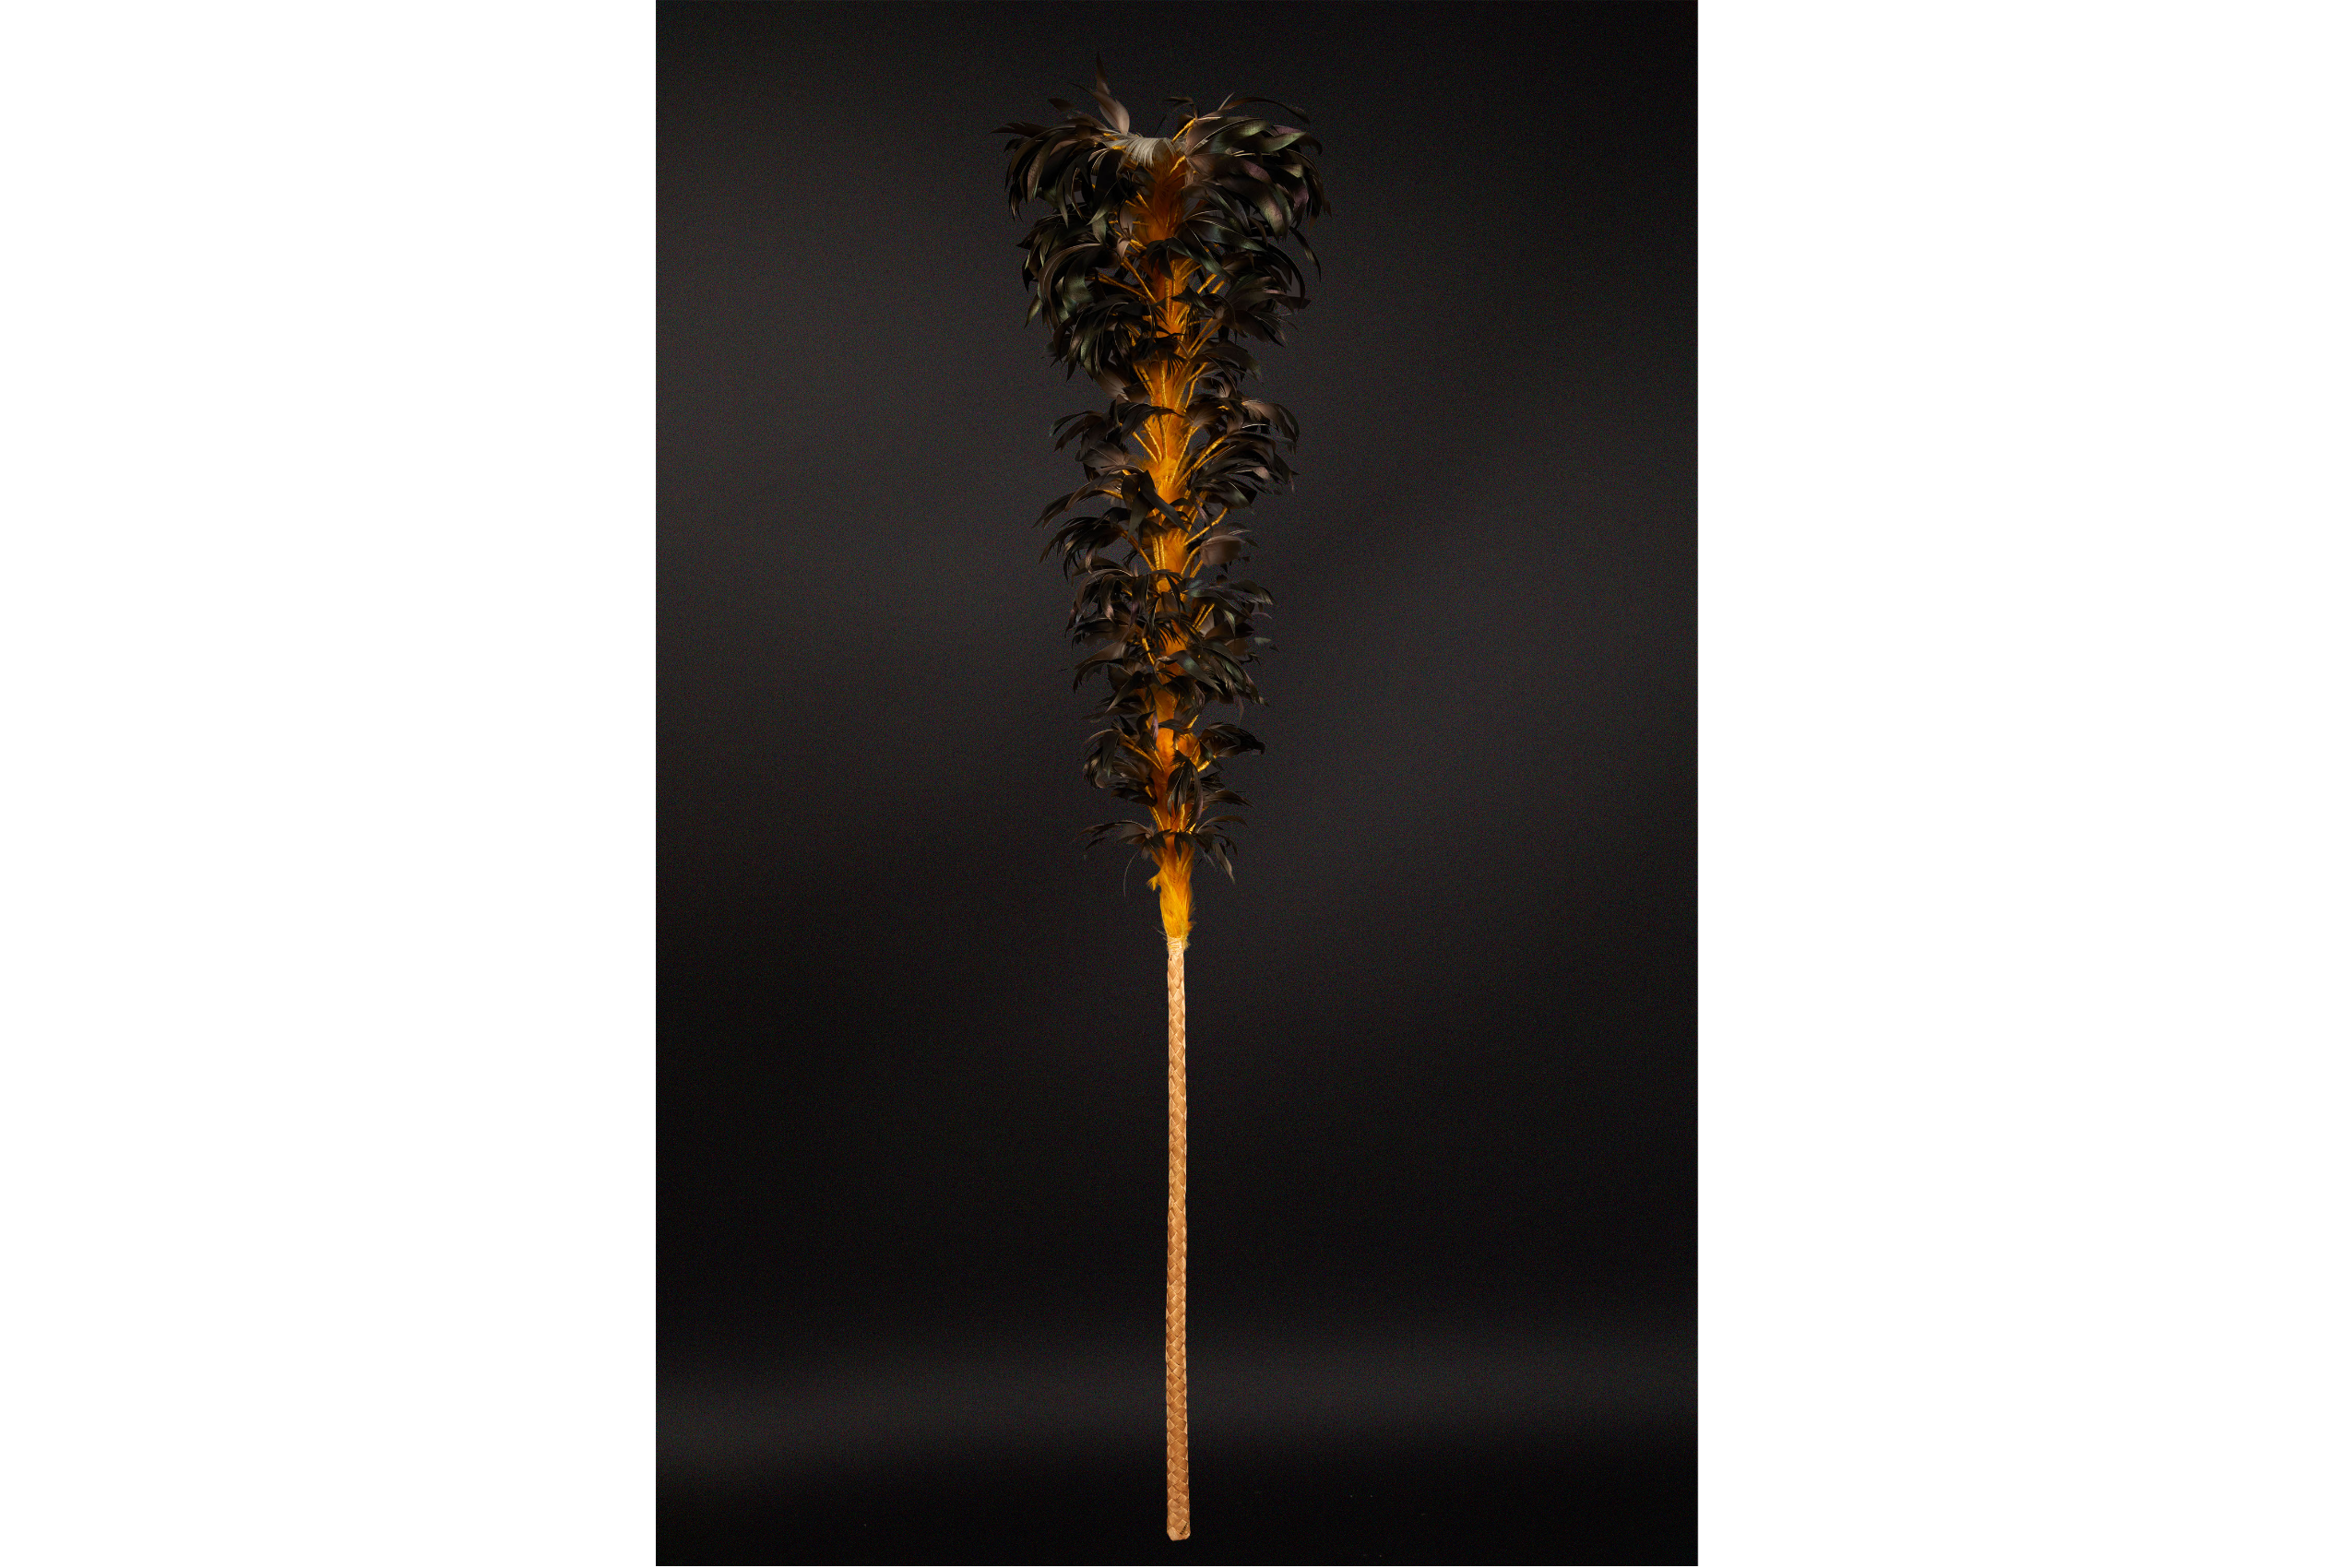 A long staff with a cluster of feathers on the top end, called kahili.